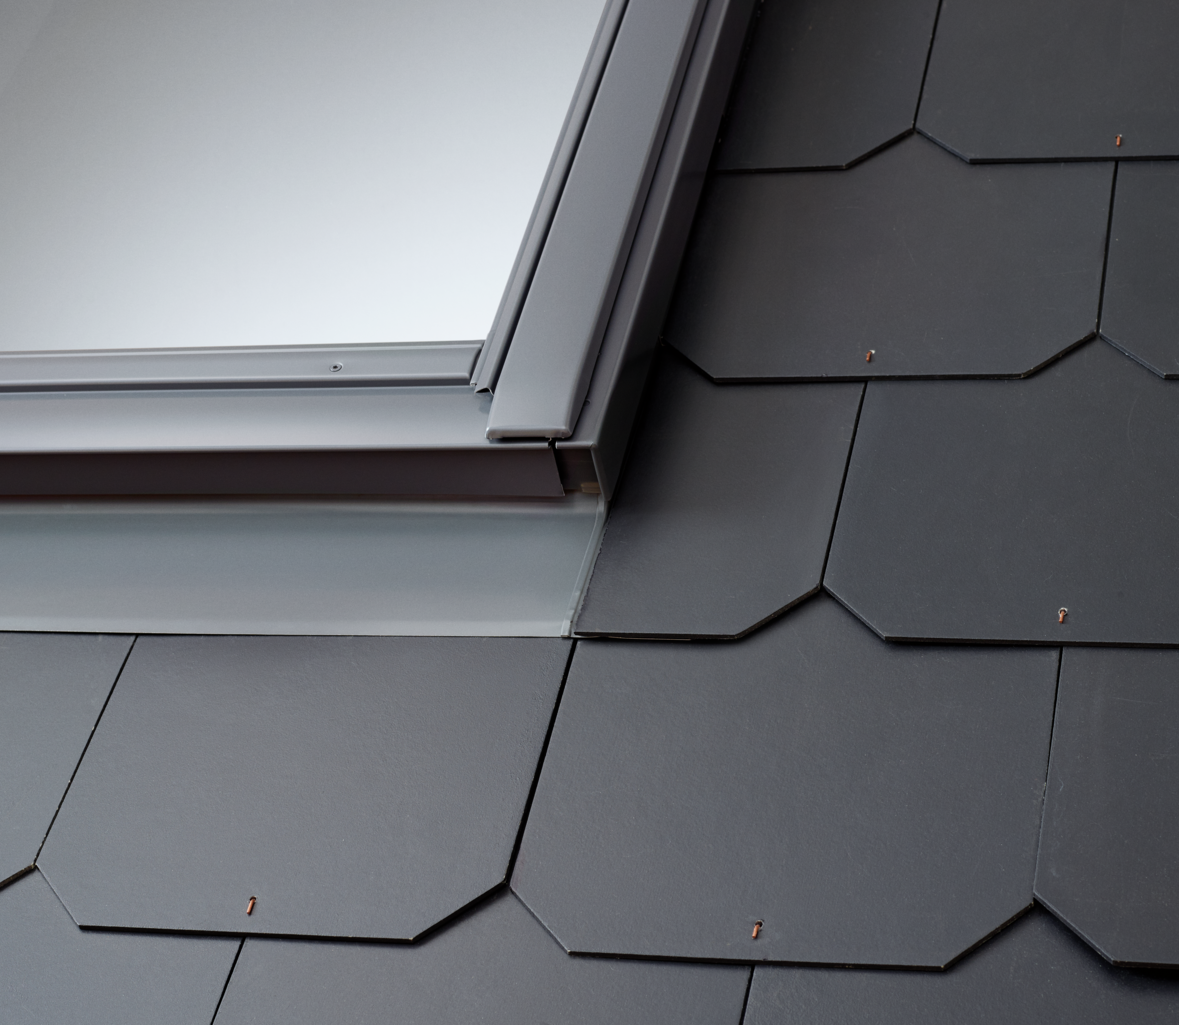 VELUX EDL MK06 S0121 for Sloping and Fixed Combinations - Slates up to 8mm thick